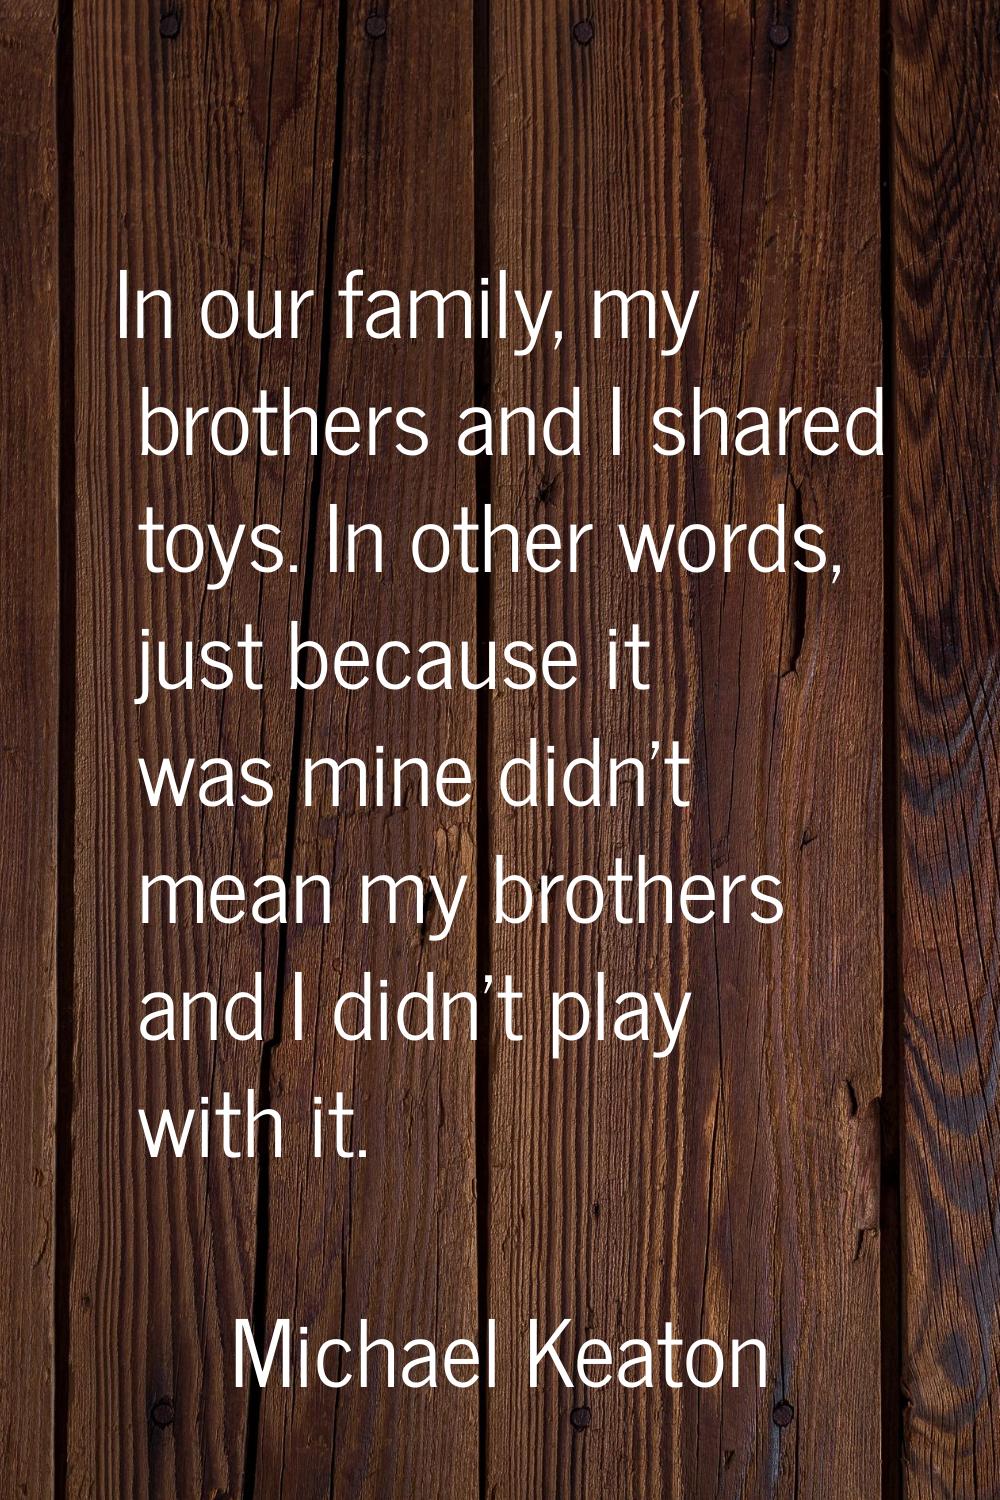 In our family, my brothers and I shared toys. In other words, just because it was mine didn't mean 